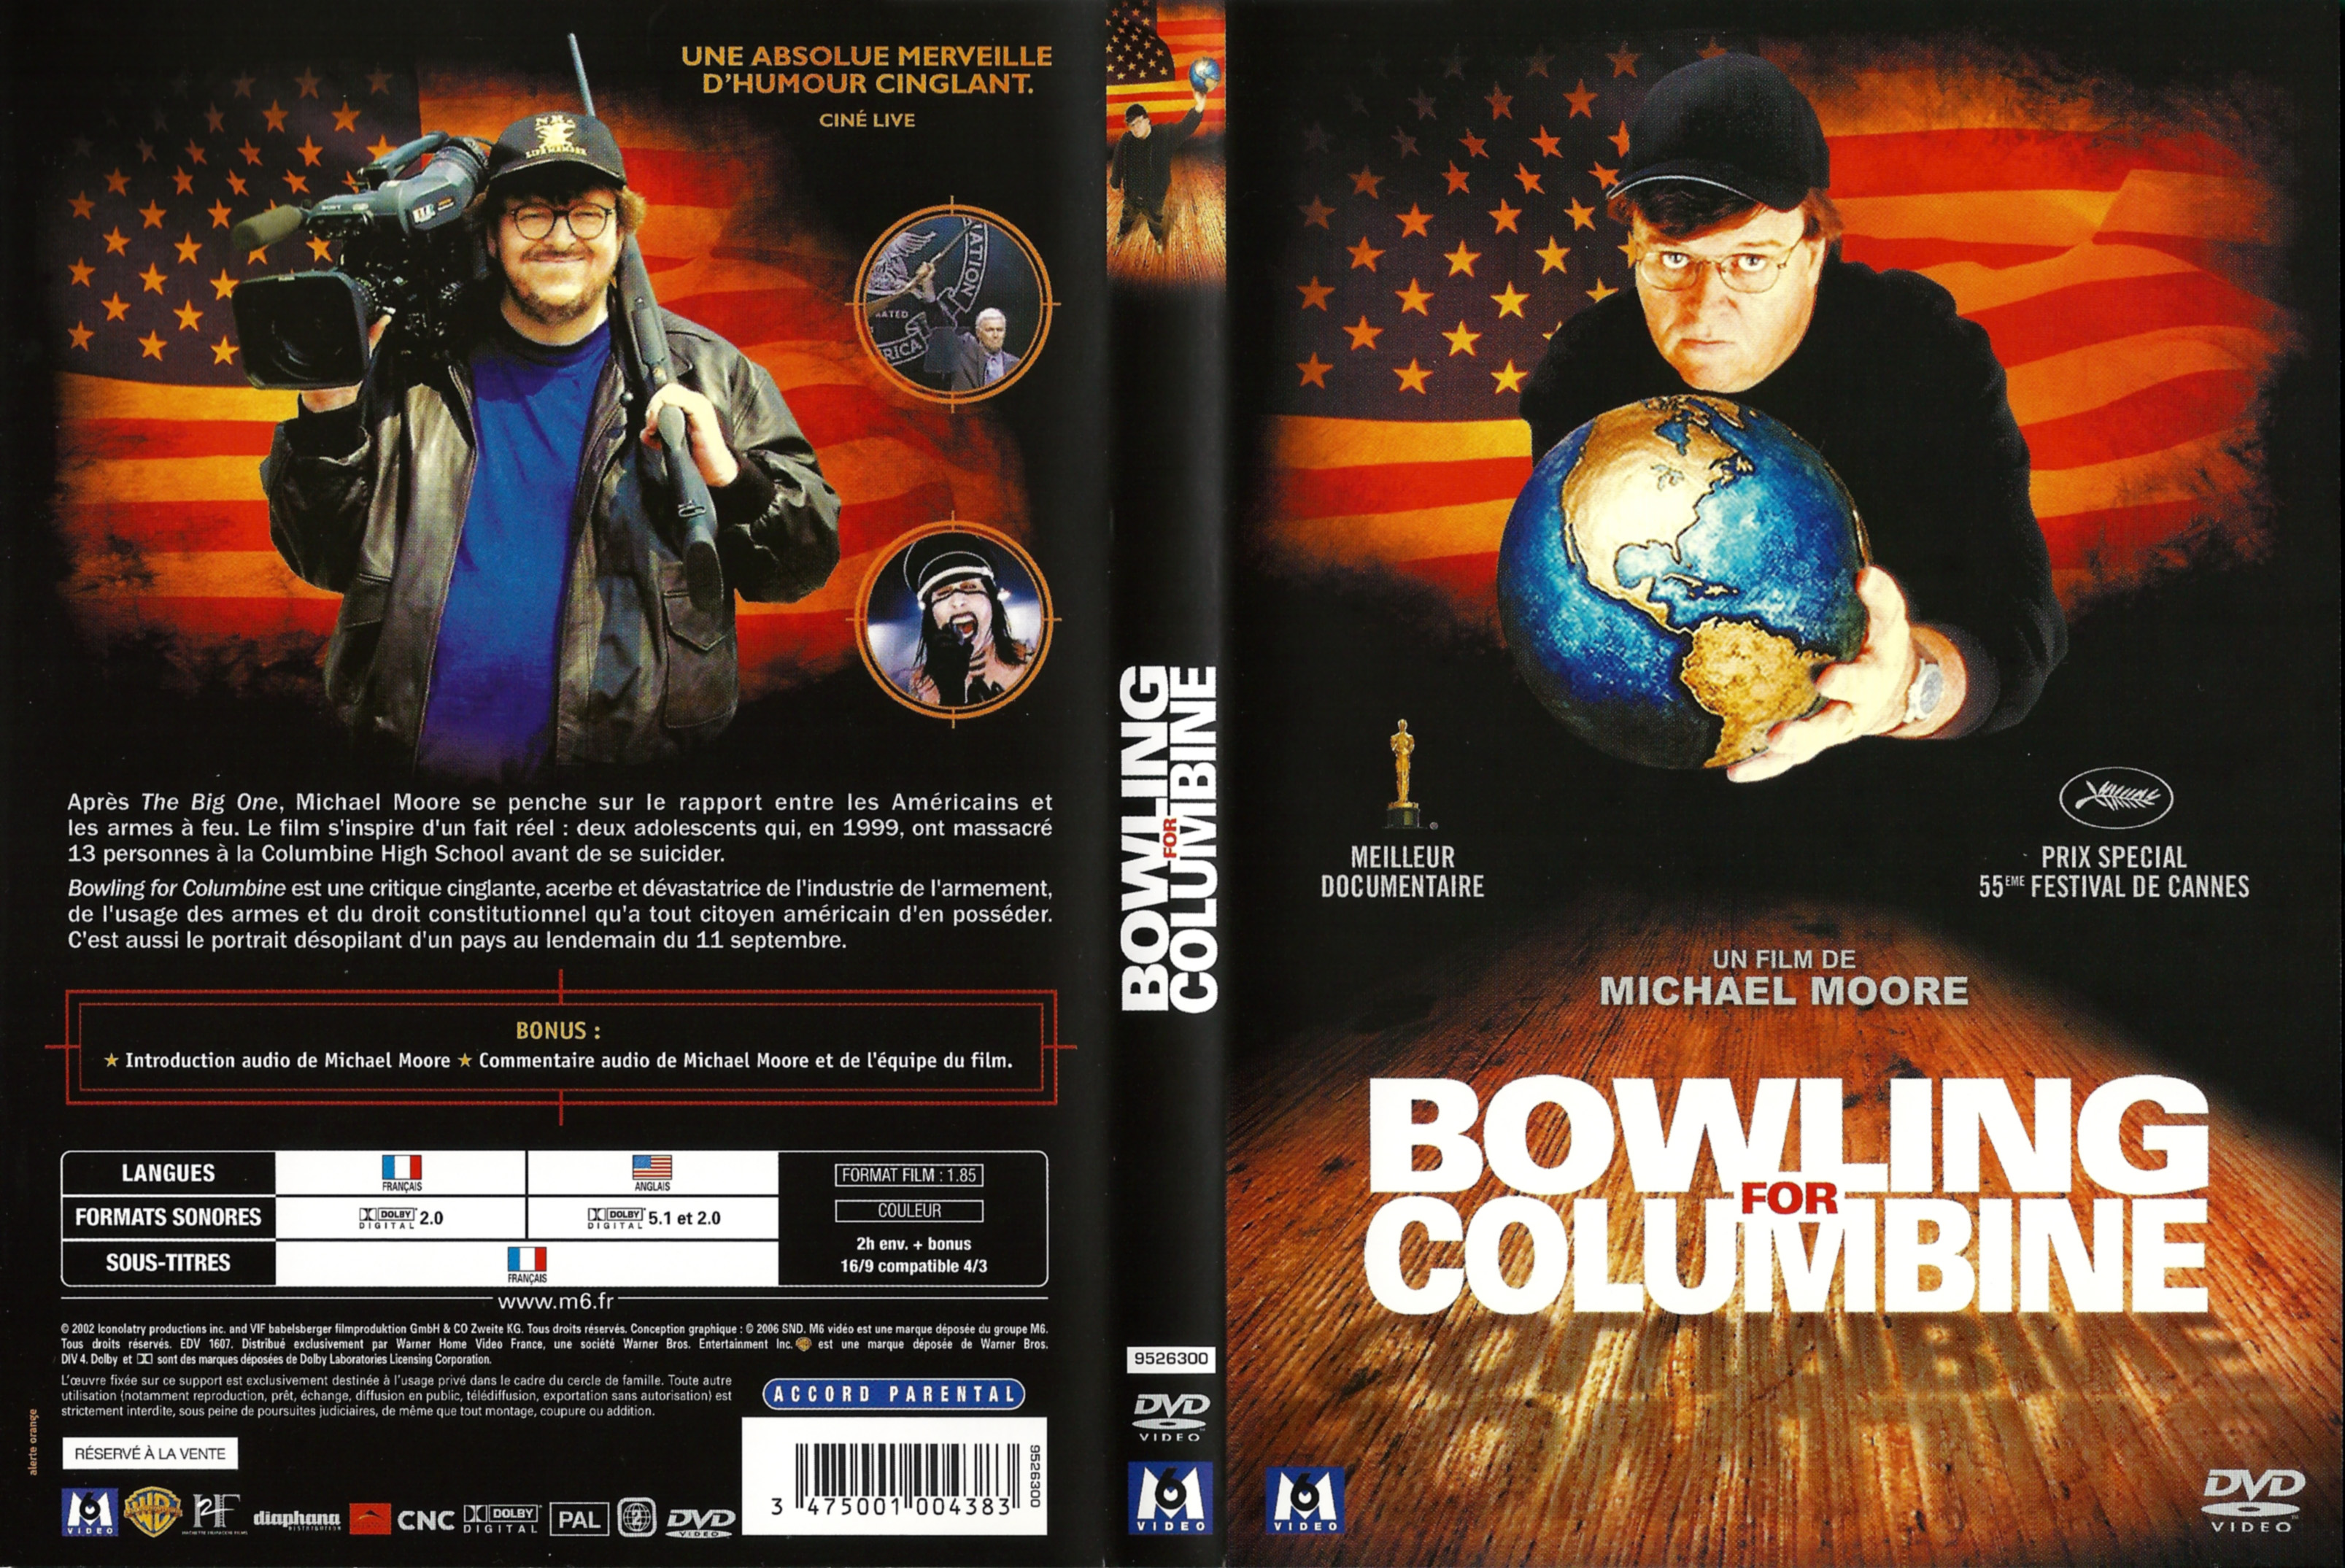 Jaquette DVD Bowling for Columbine v3